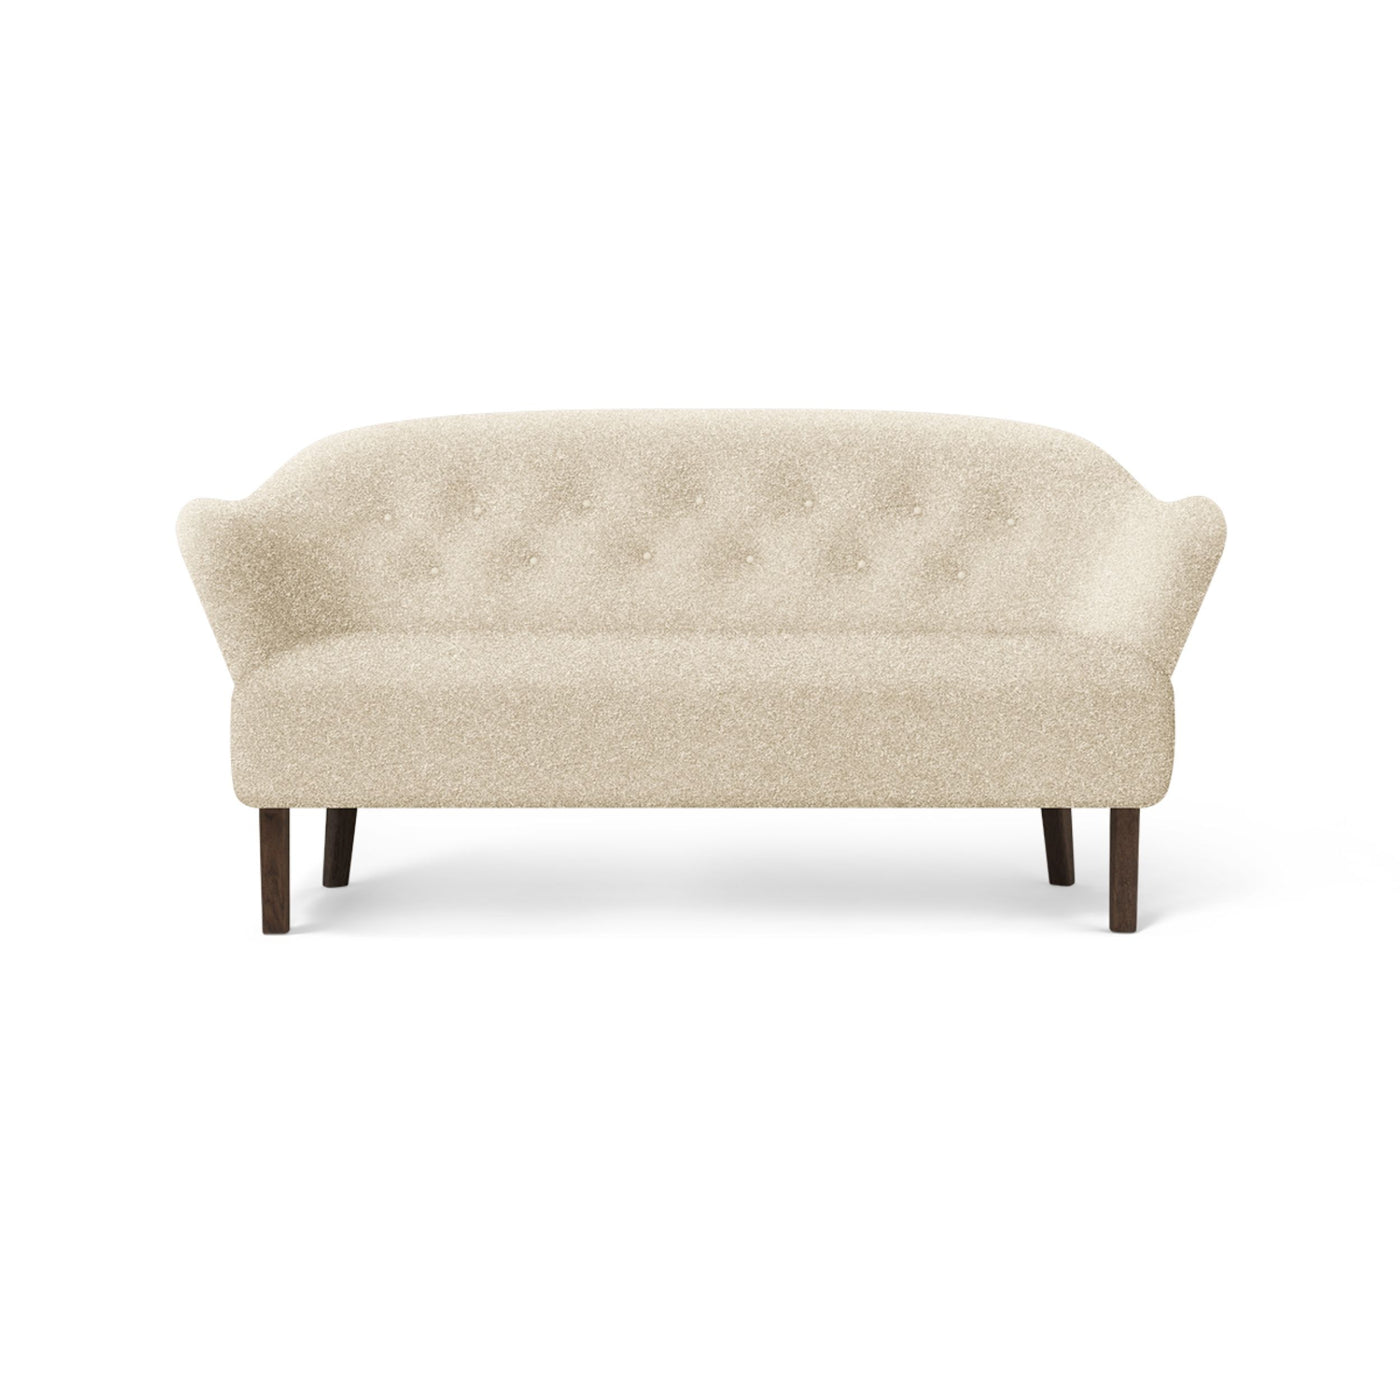 By Lassen Ingeborg sofa with smoked oak legs. Made to order from someday designs. #colour_sahco-zero-1